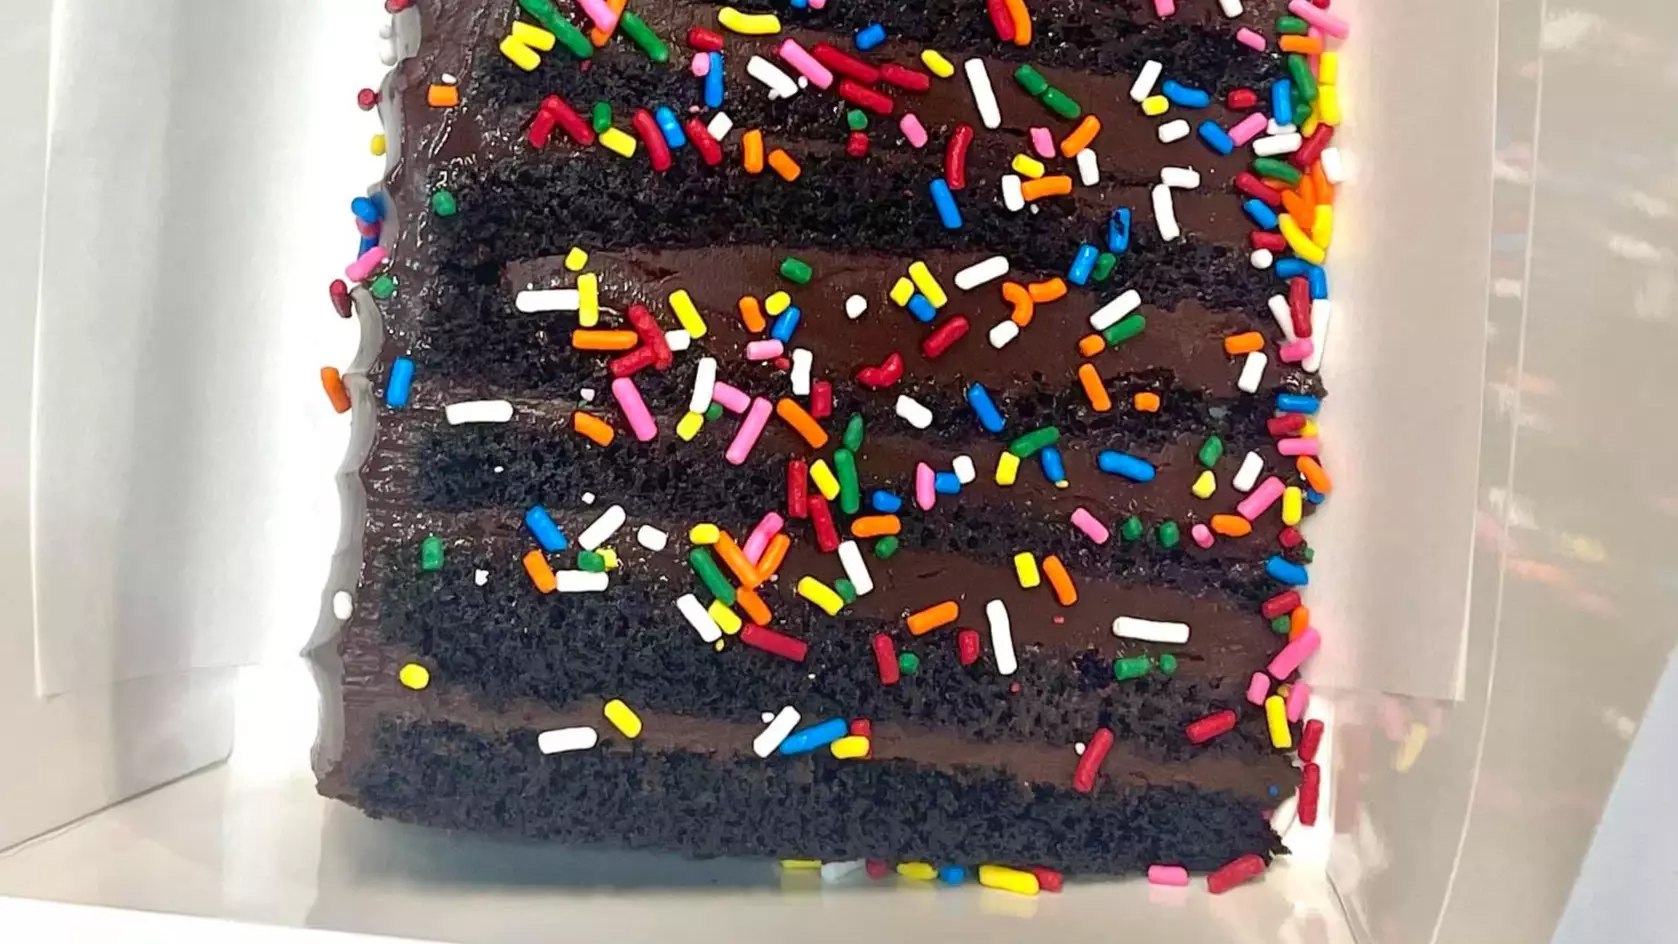 Baker's Furious Rant Goes Viral After Customer Reports 'Illegal Sprinkles' To Trading Standards